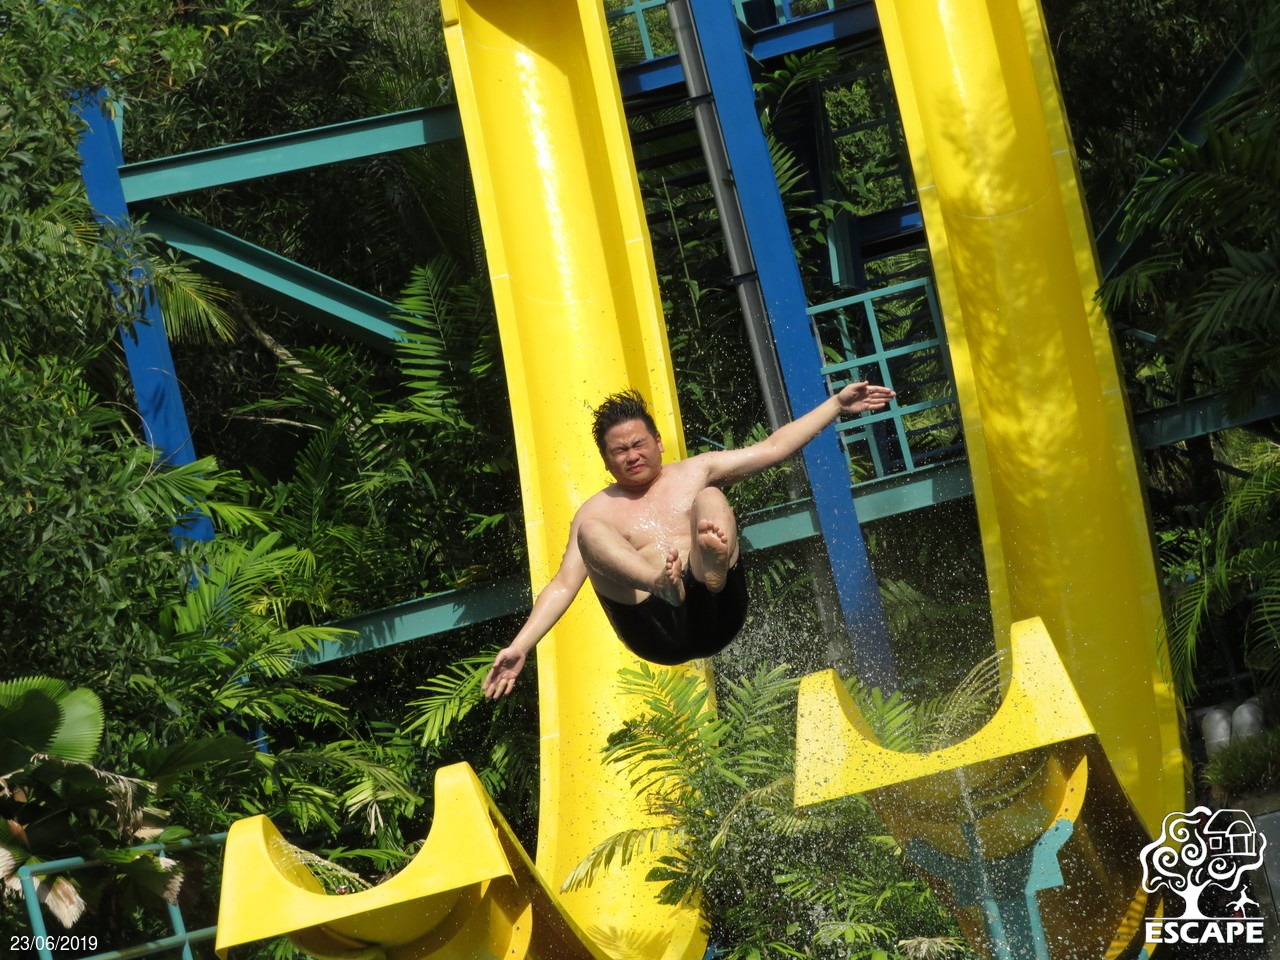 World's Longest Water Slide At Escape Theme Park In Penang